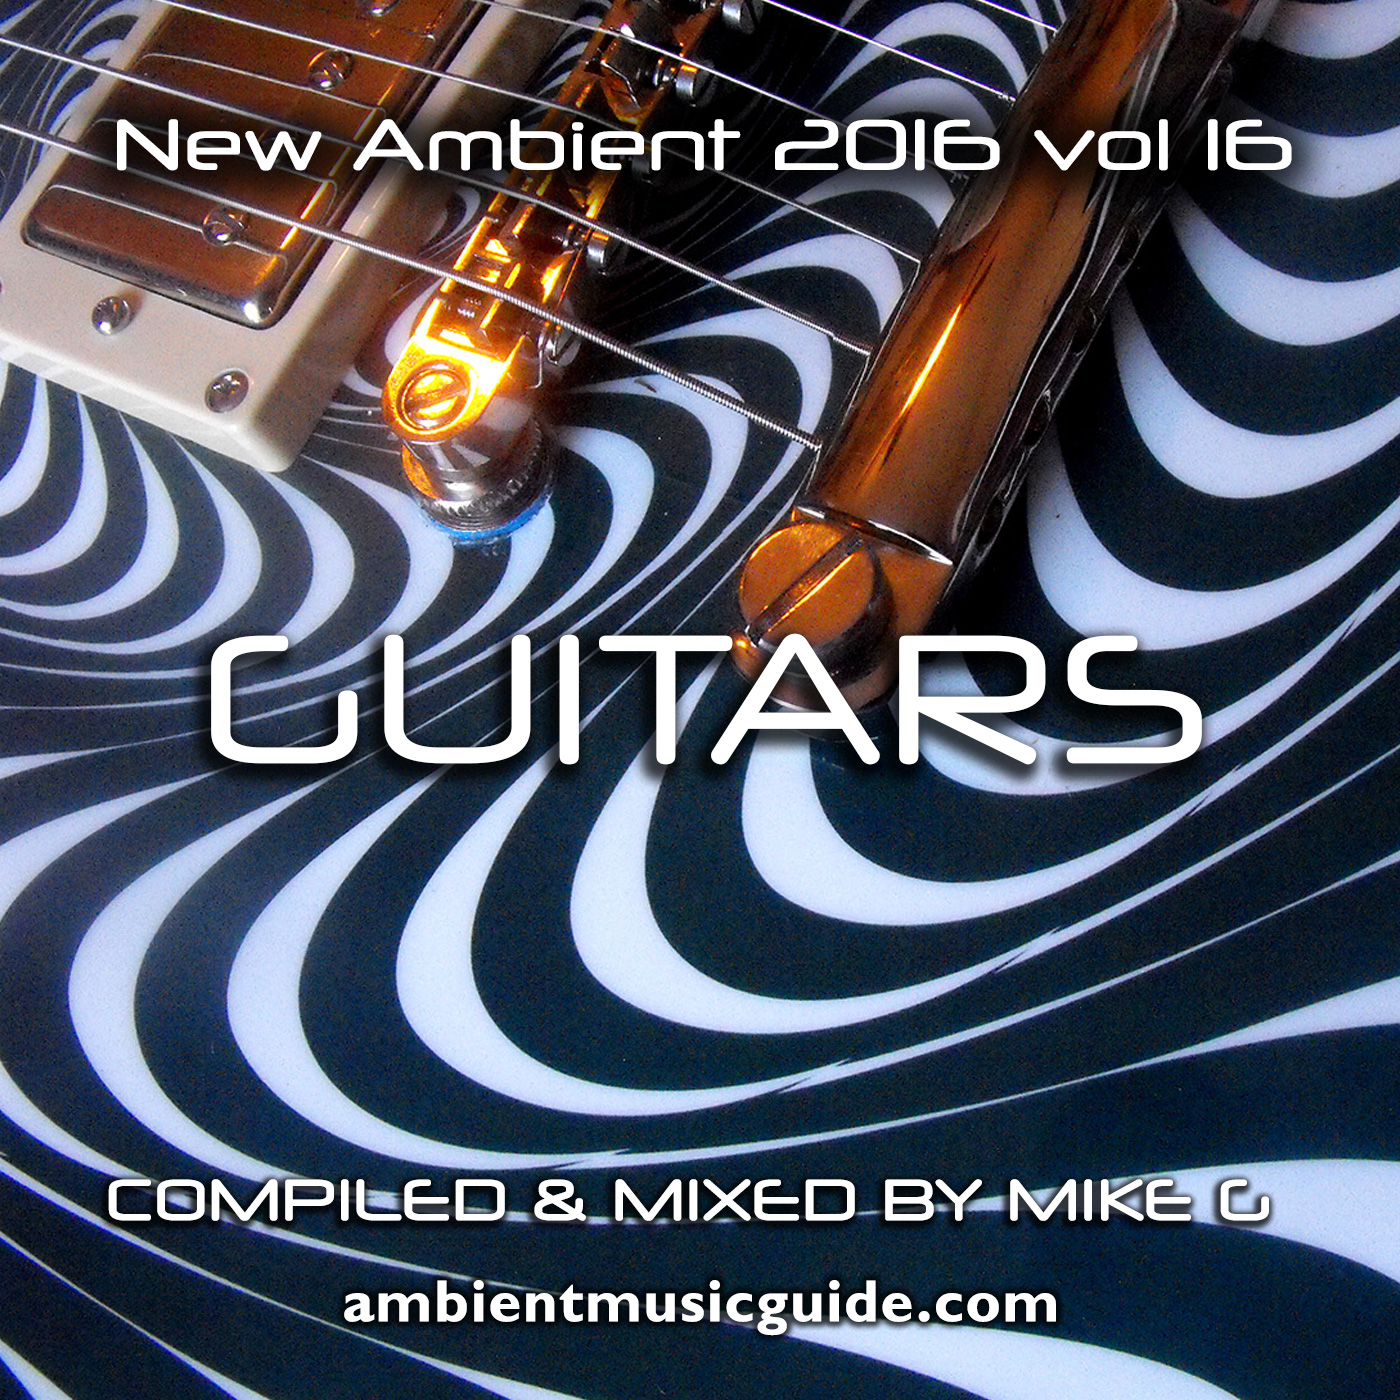 Guitars - New Ambient 2016 vol. 16 mixed by Mike G